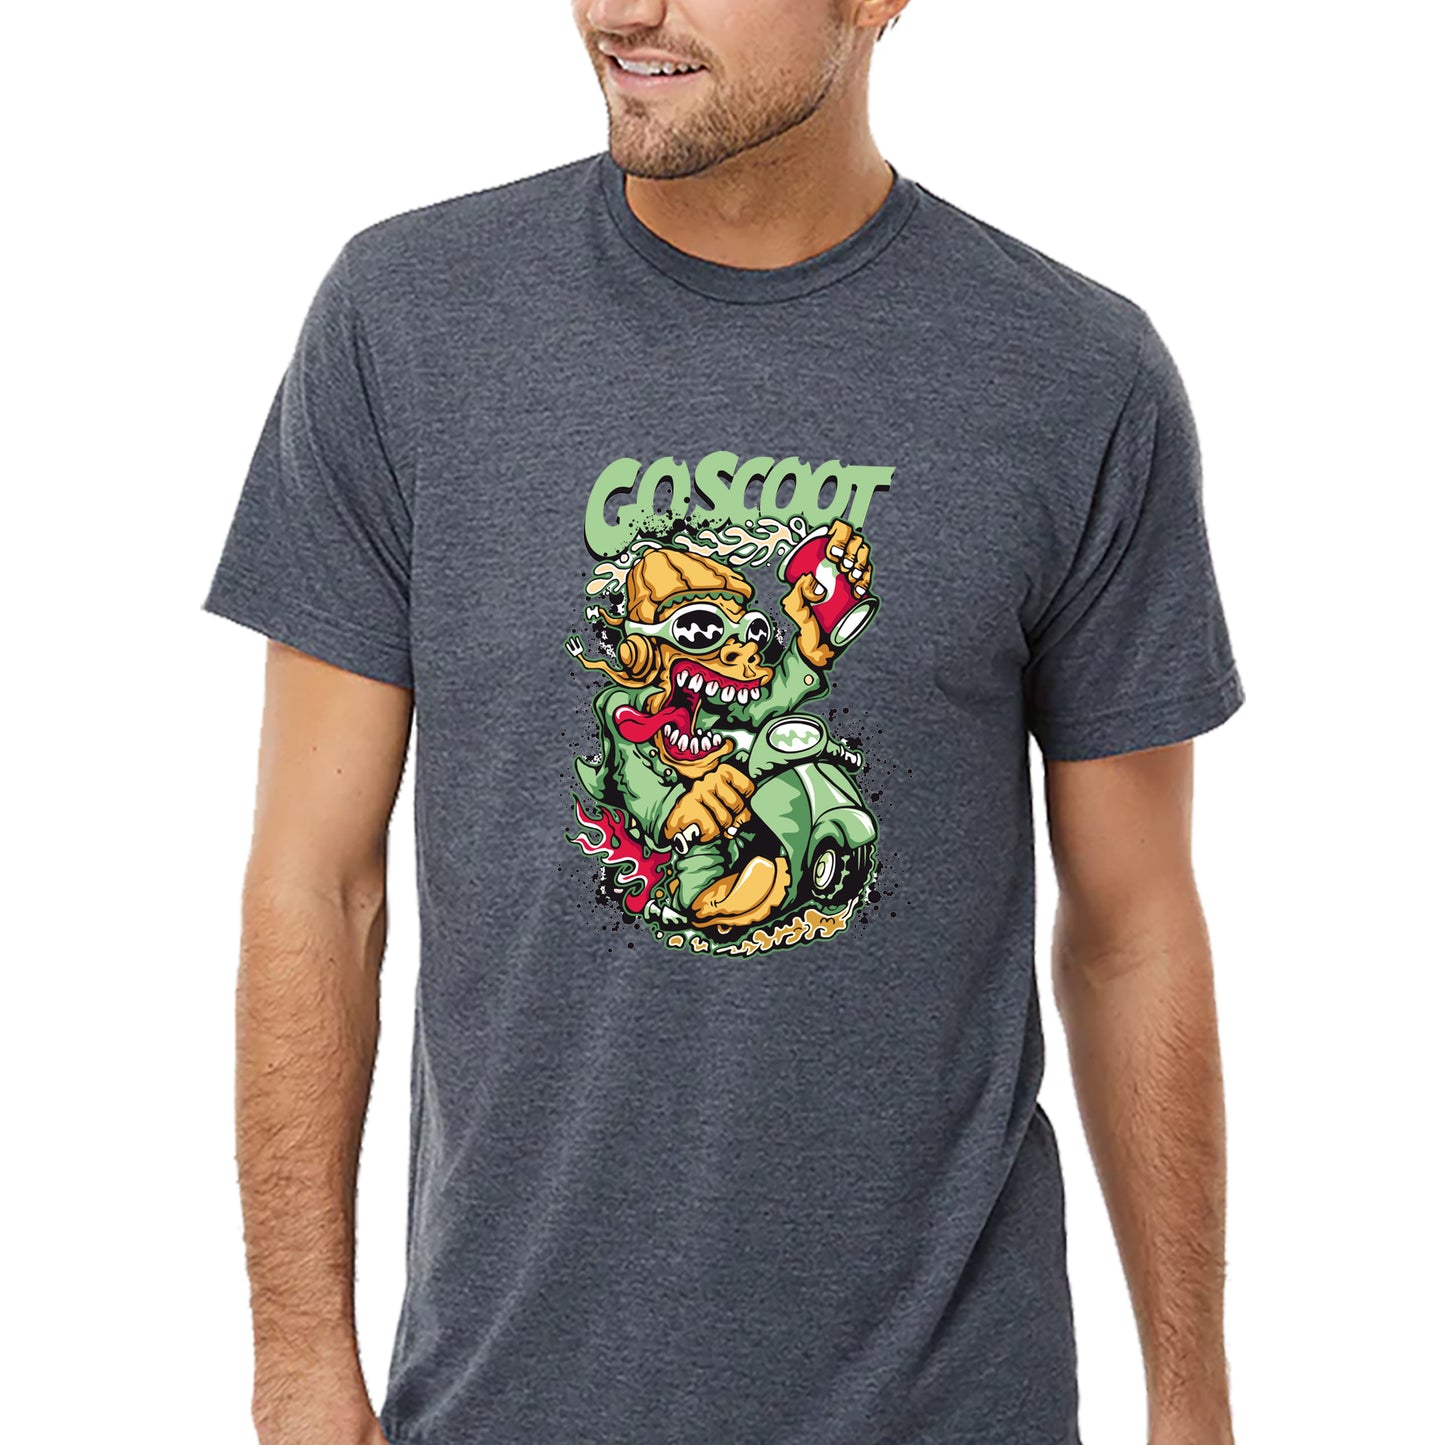 Go Scooter T-shirt